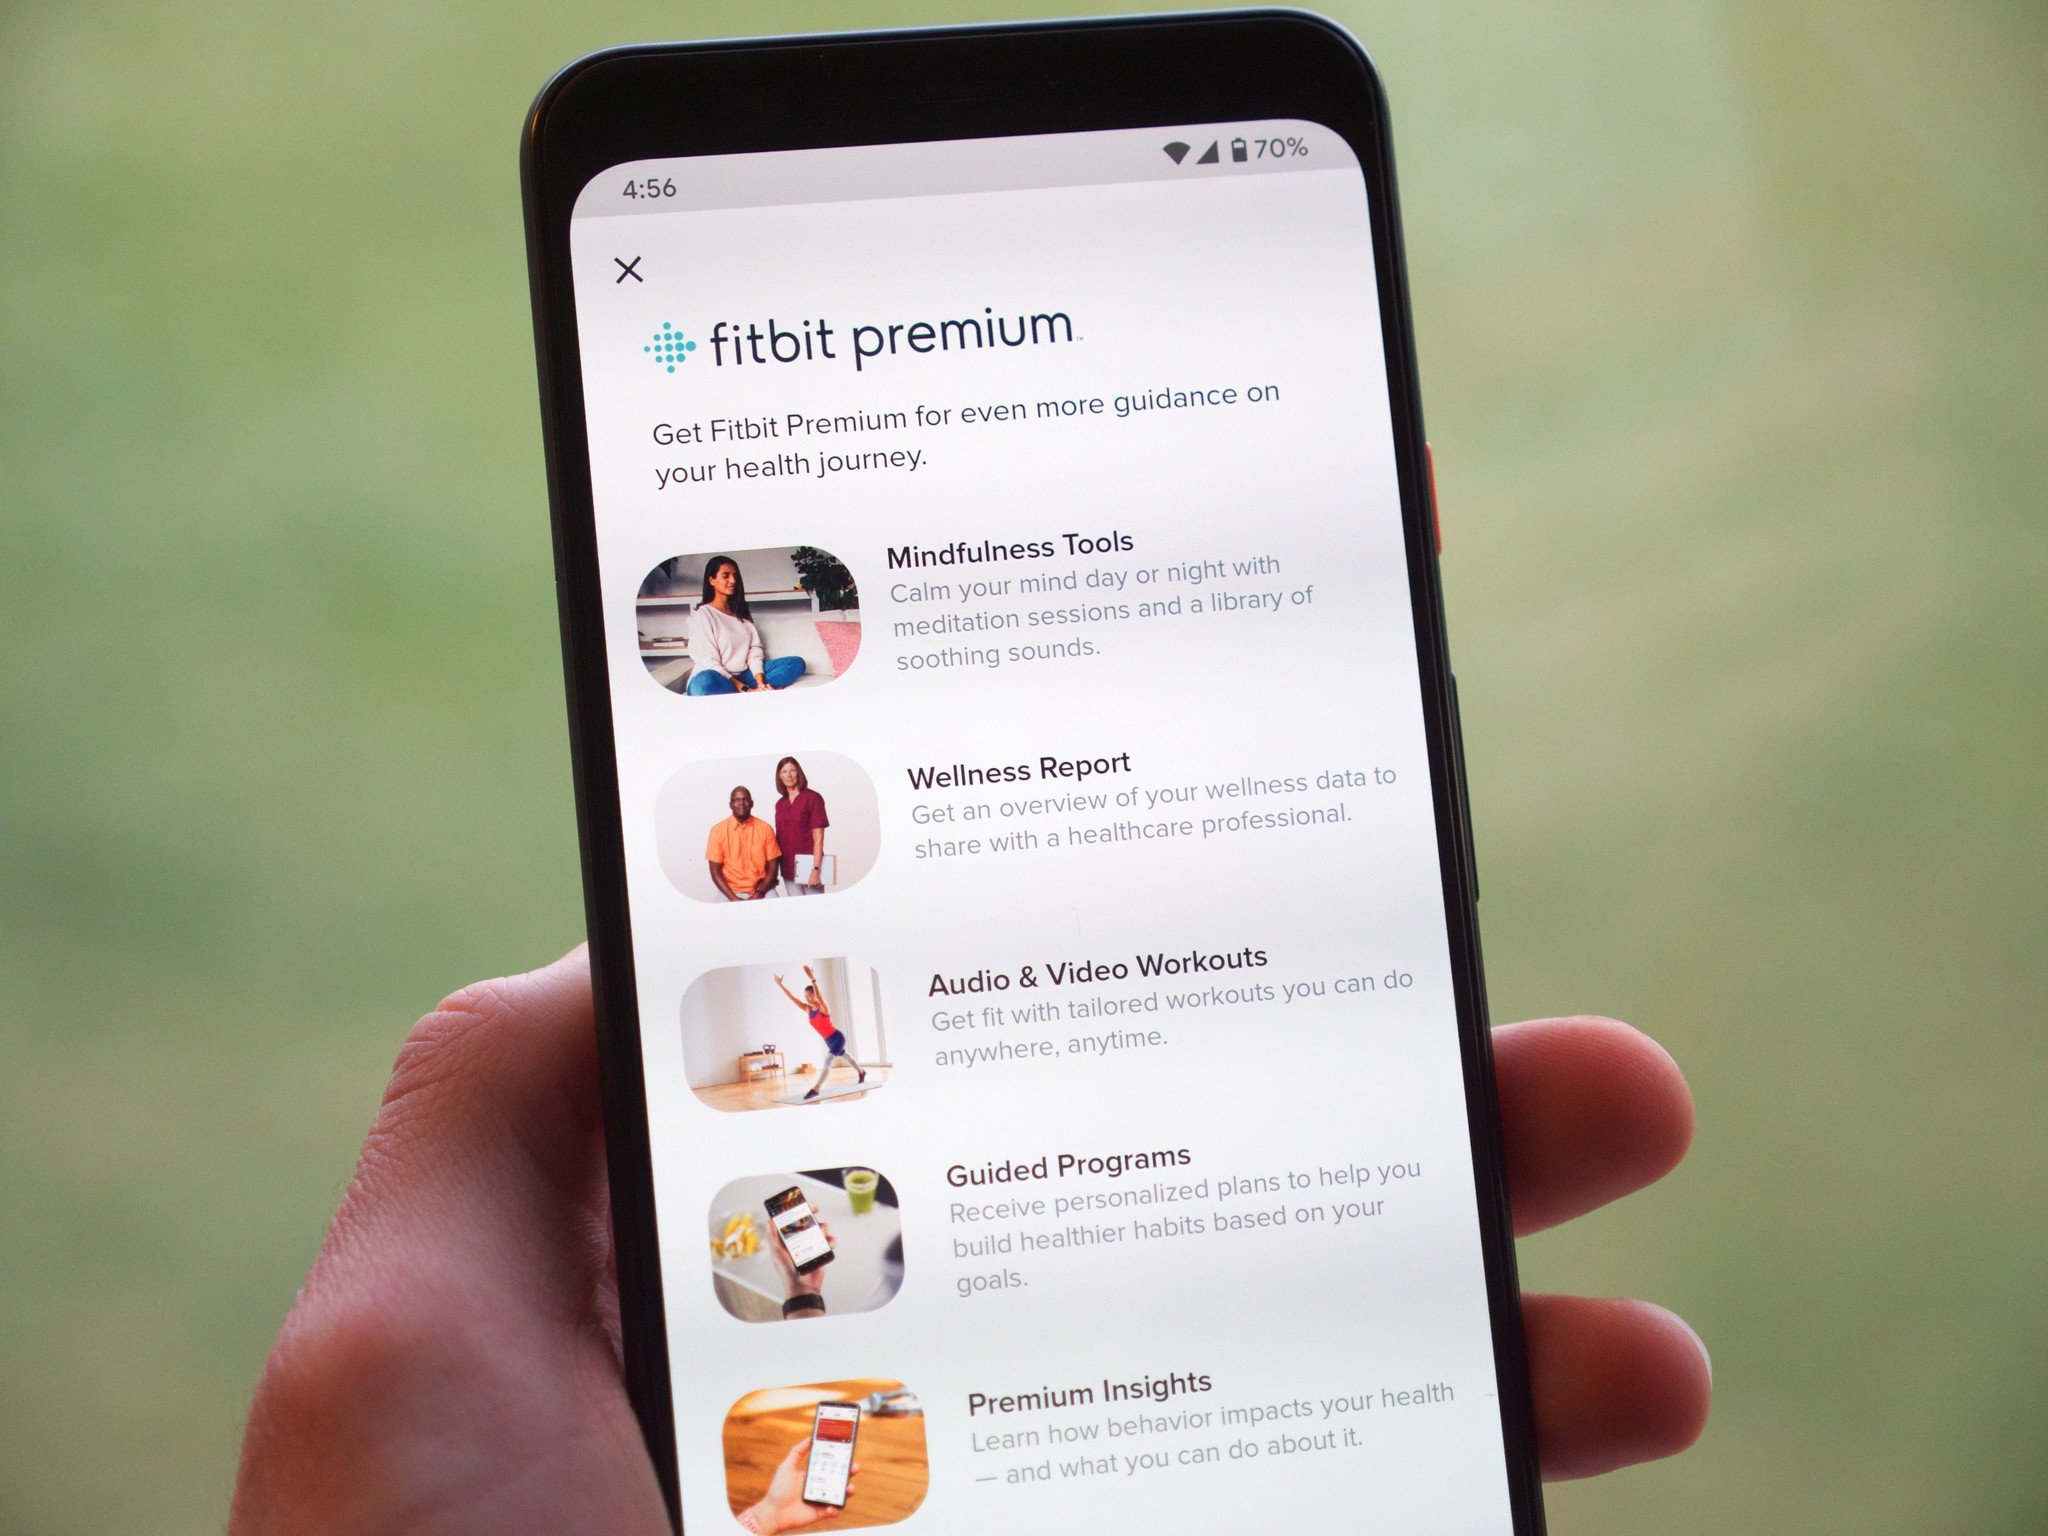 How to sign up for Fitbit Premium